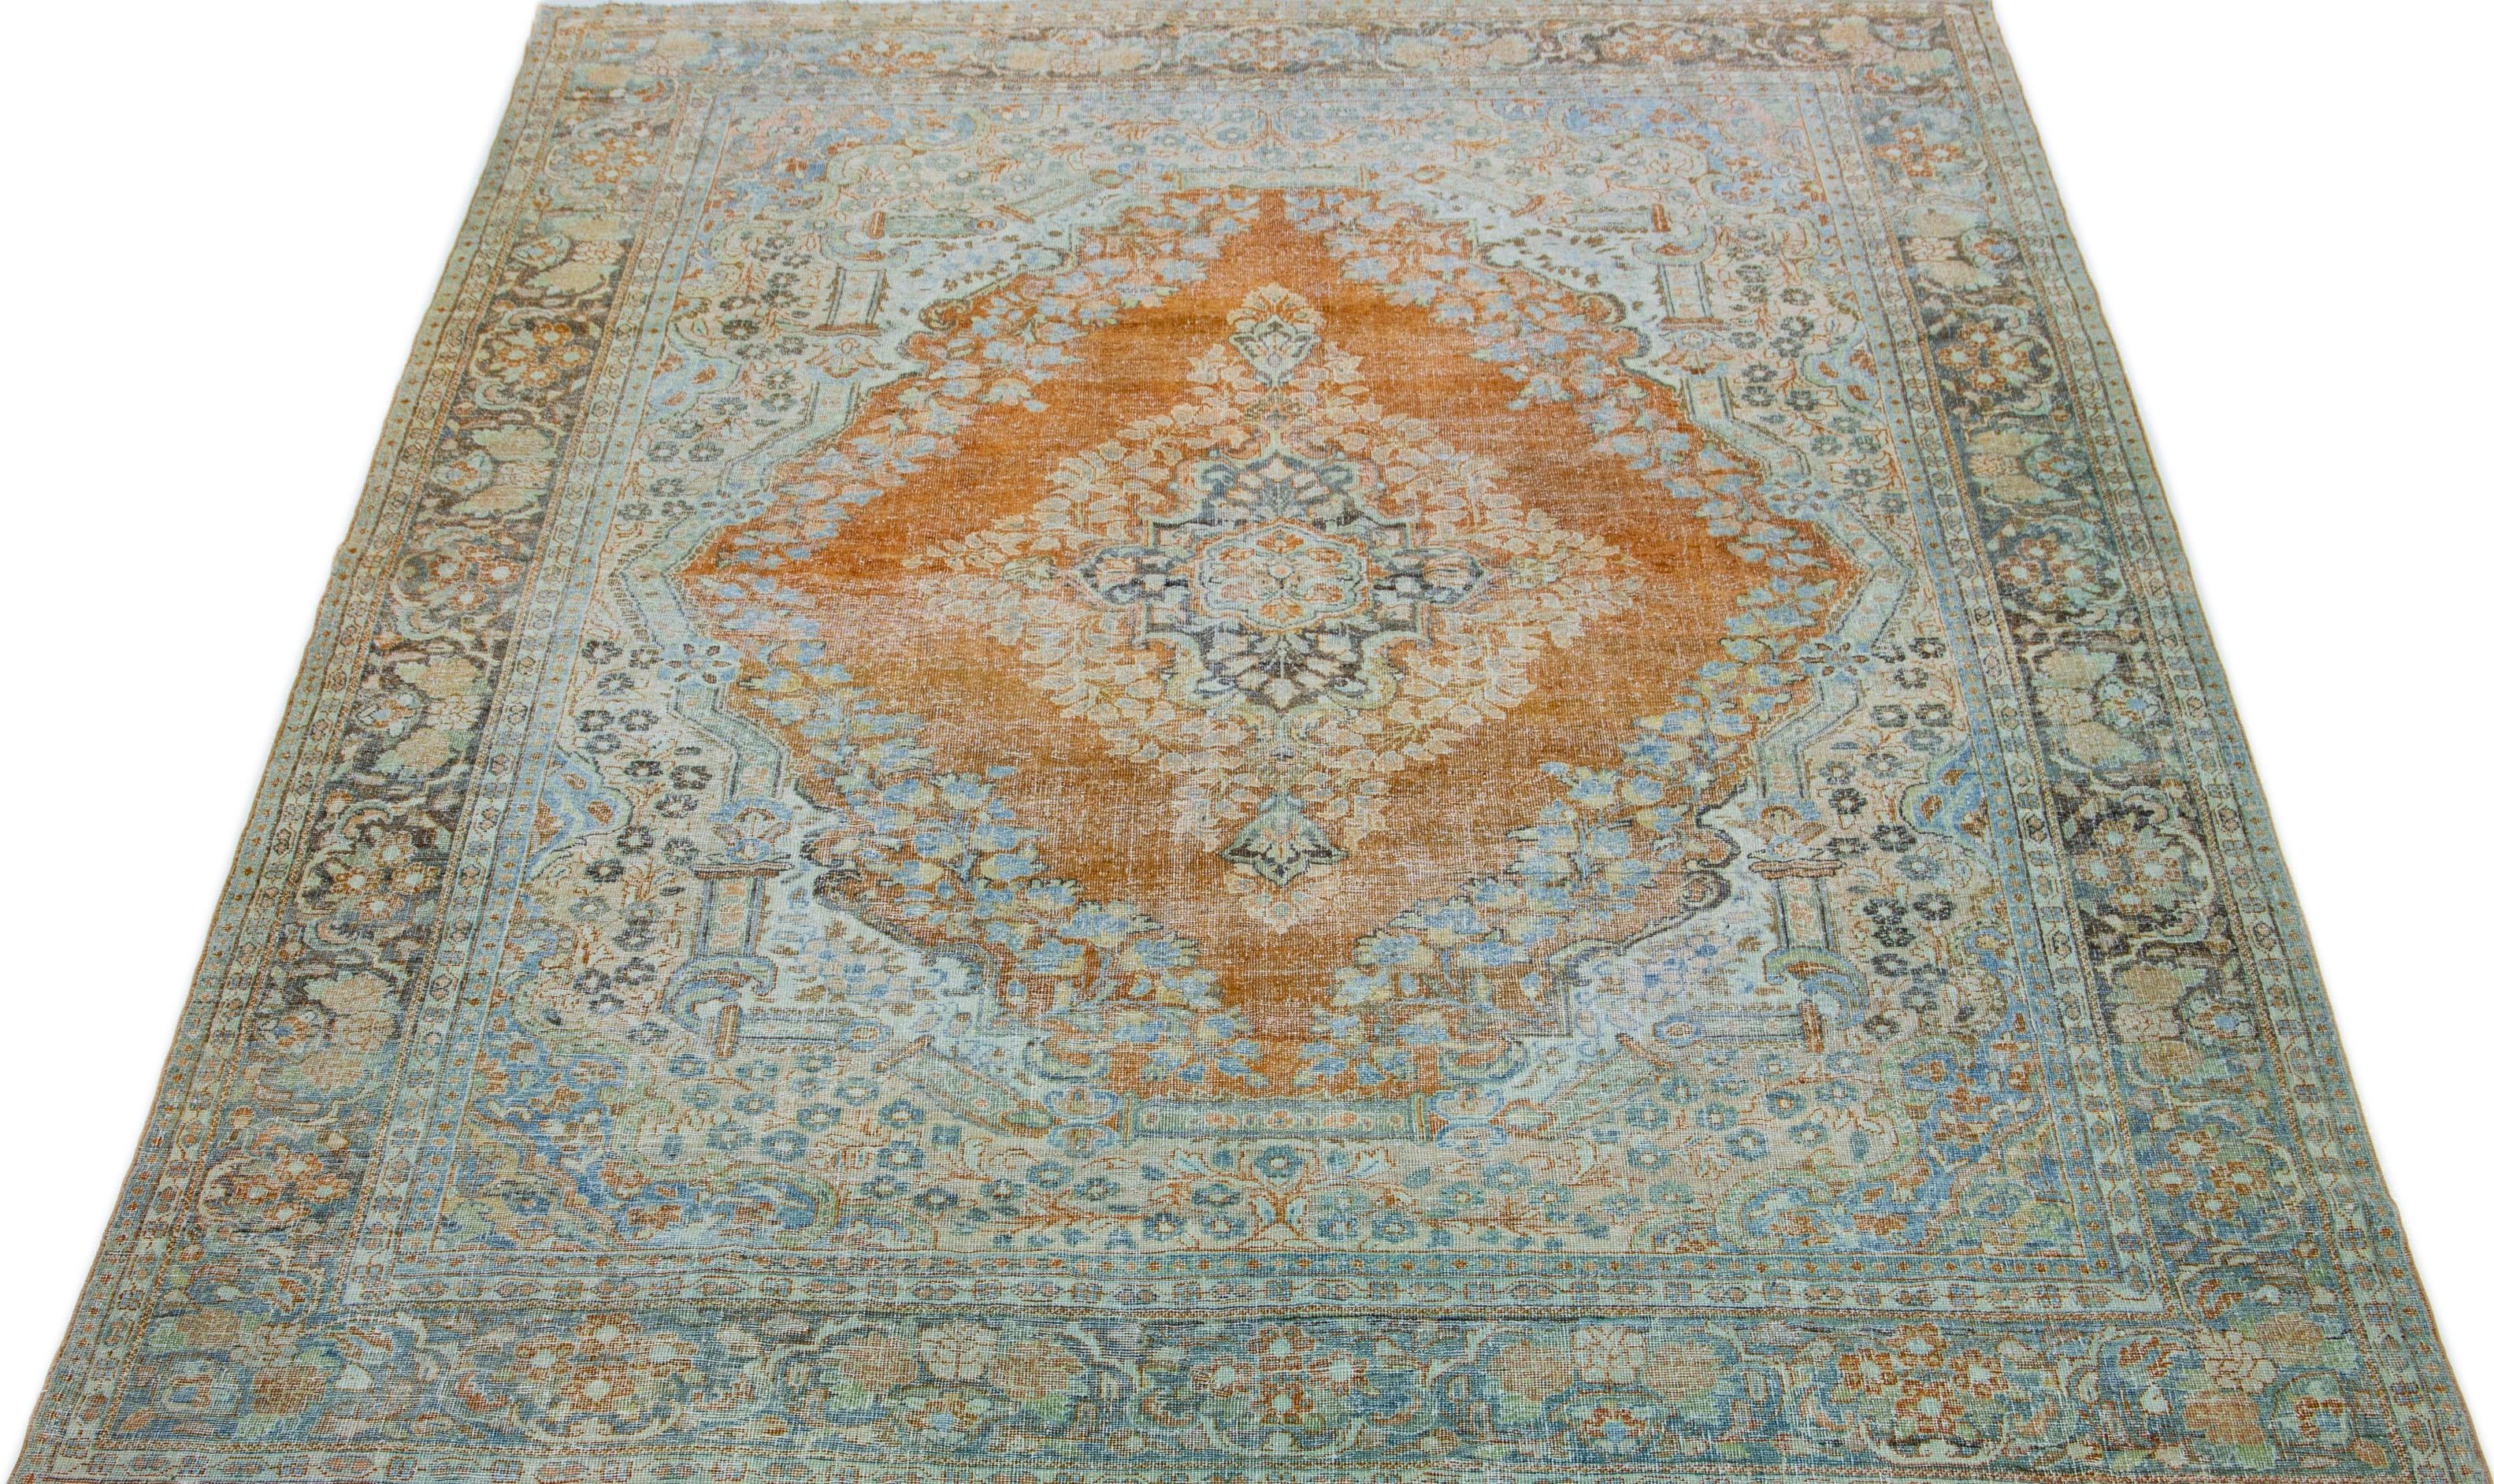 This antique wool rug from the 1920s showcases expert hand-knotted quality and boasts a medallion floral design. The primary color scheme of this rug is composed of orange and rust tones with complementary hues of blue, peach, and gray, resulting in